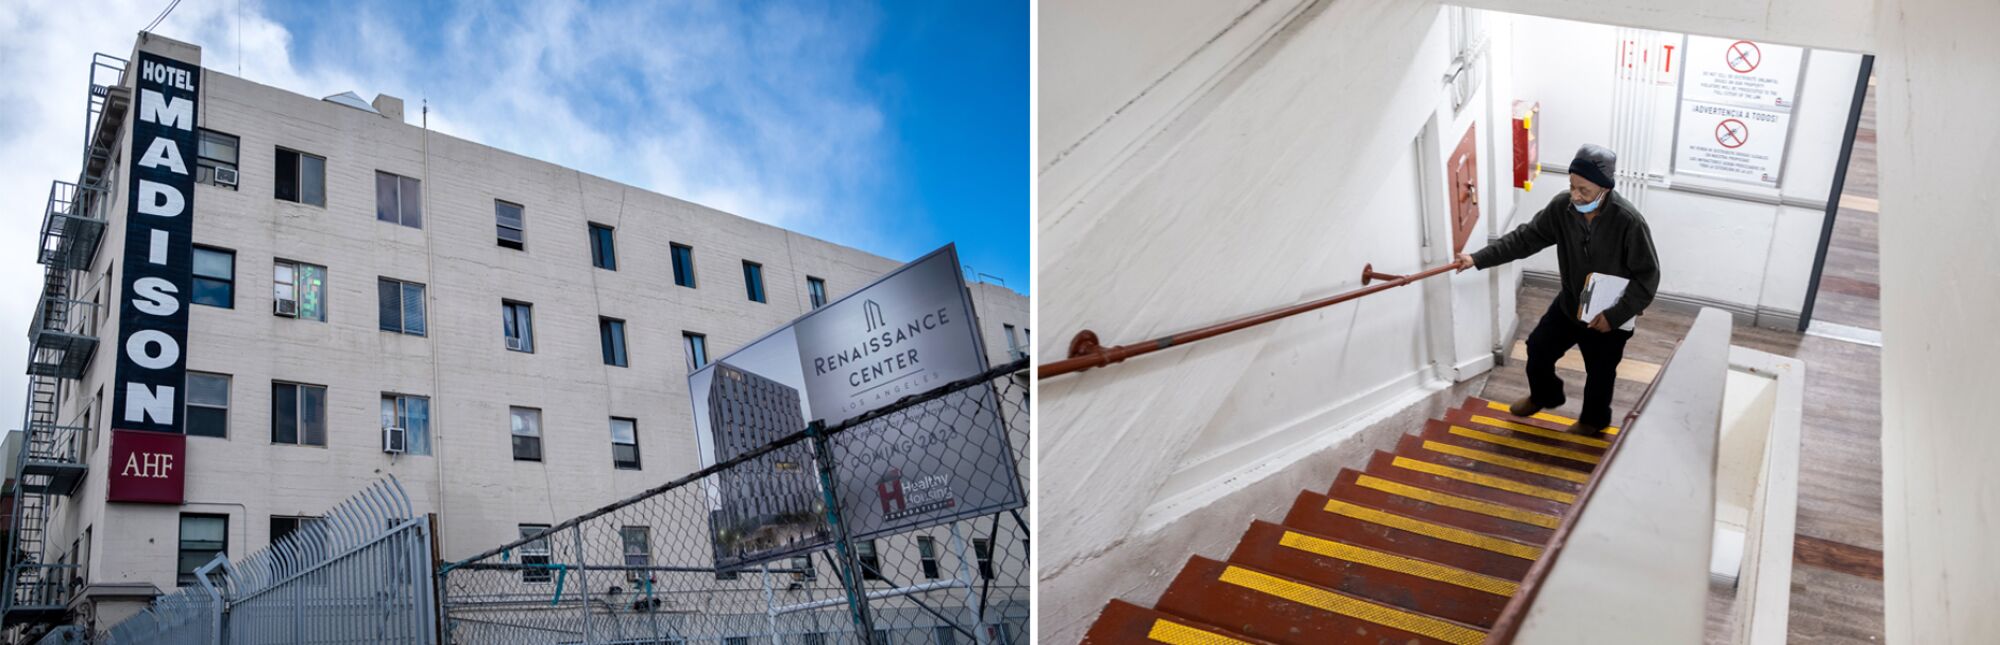 A diptych of a building with a sign reading "Madison AHF" on the left, and a man ascending stairs on the right.  